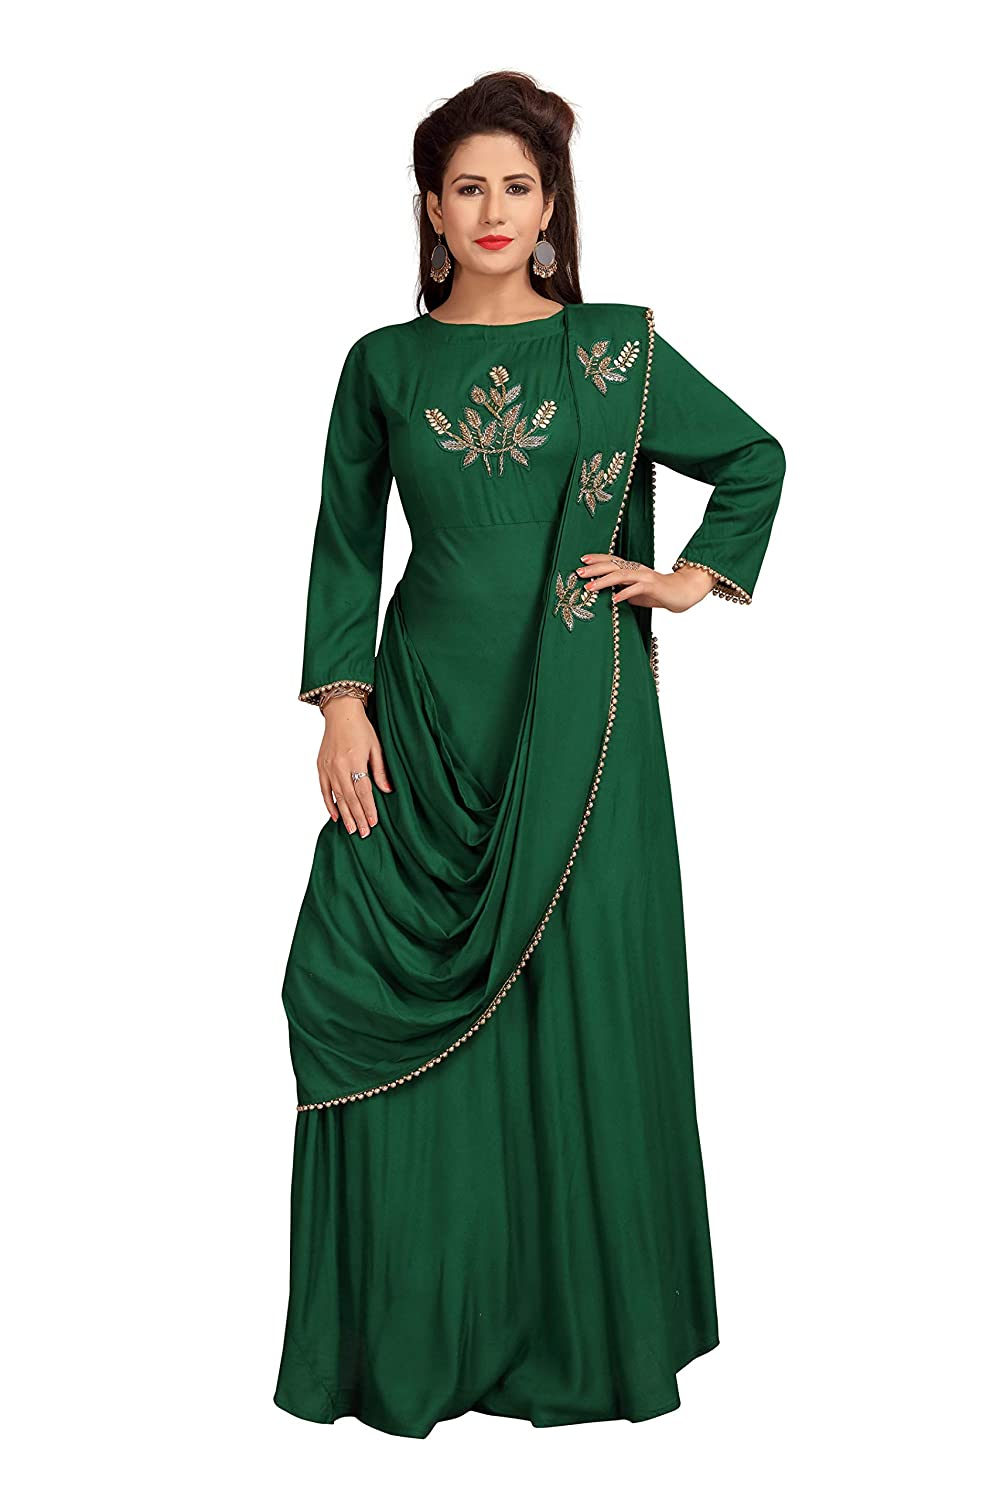 Green Long Frock For Ladies